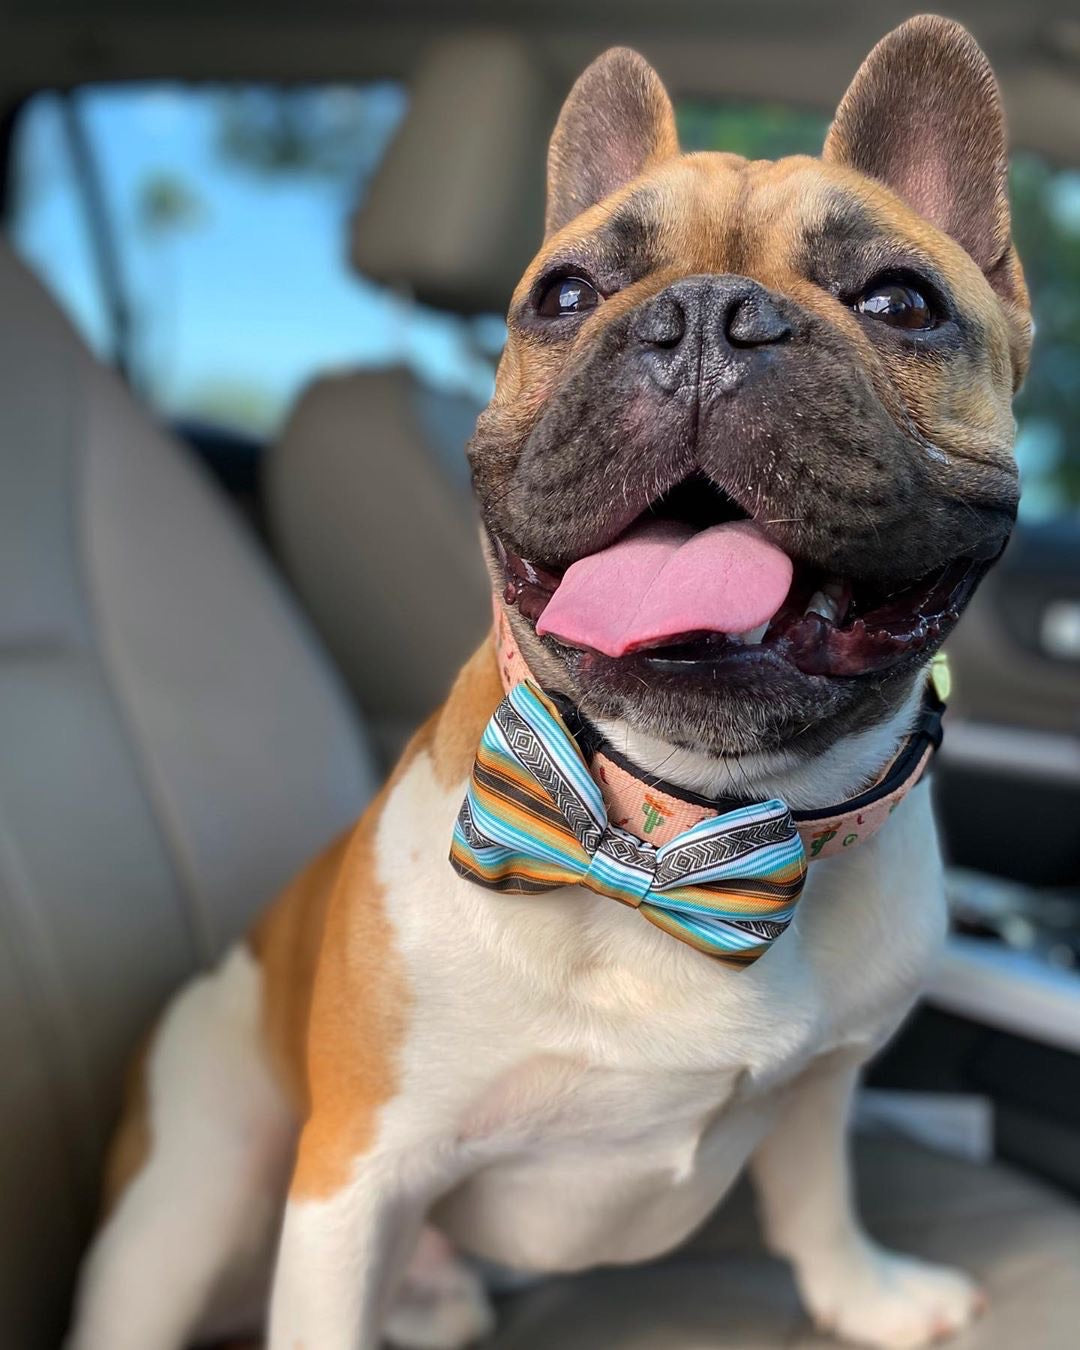 Frenchiestore Luxury Leash | Frenchie Love in Teal